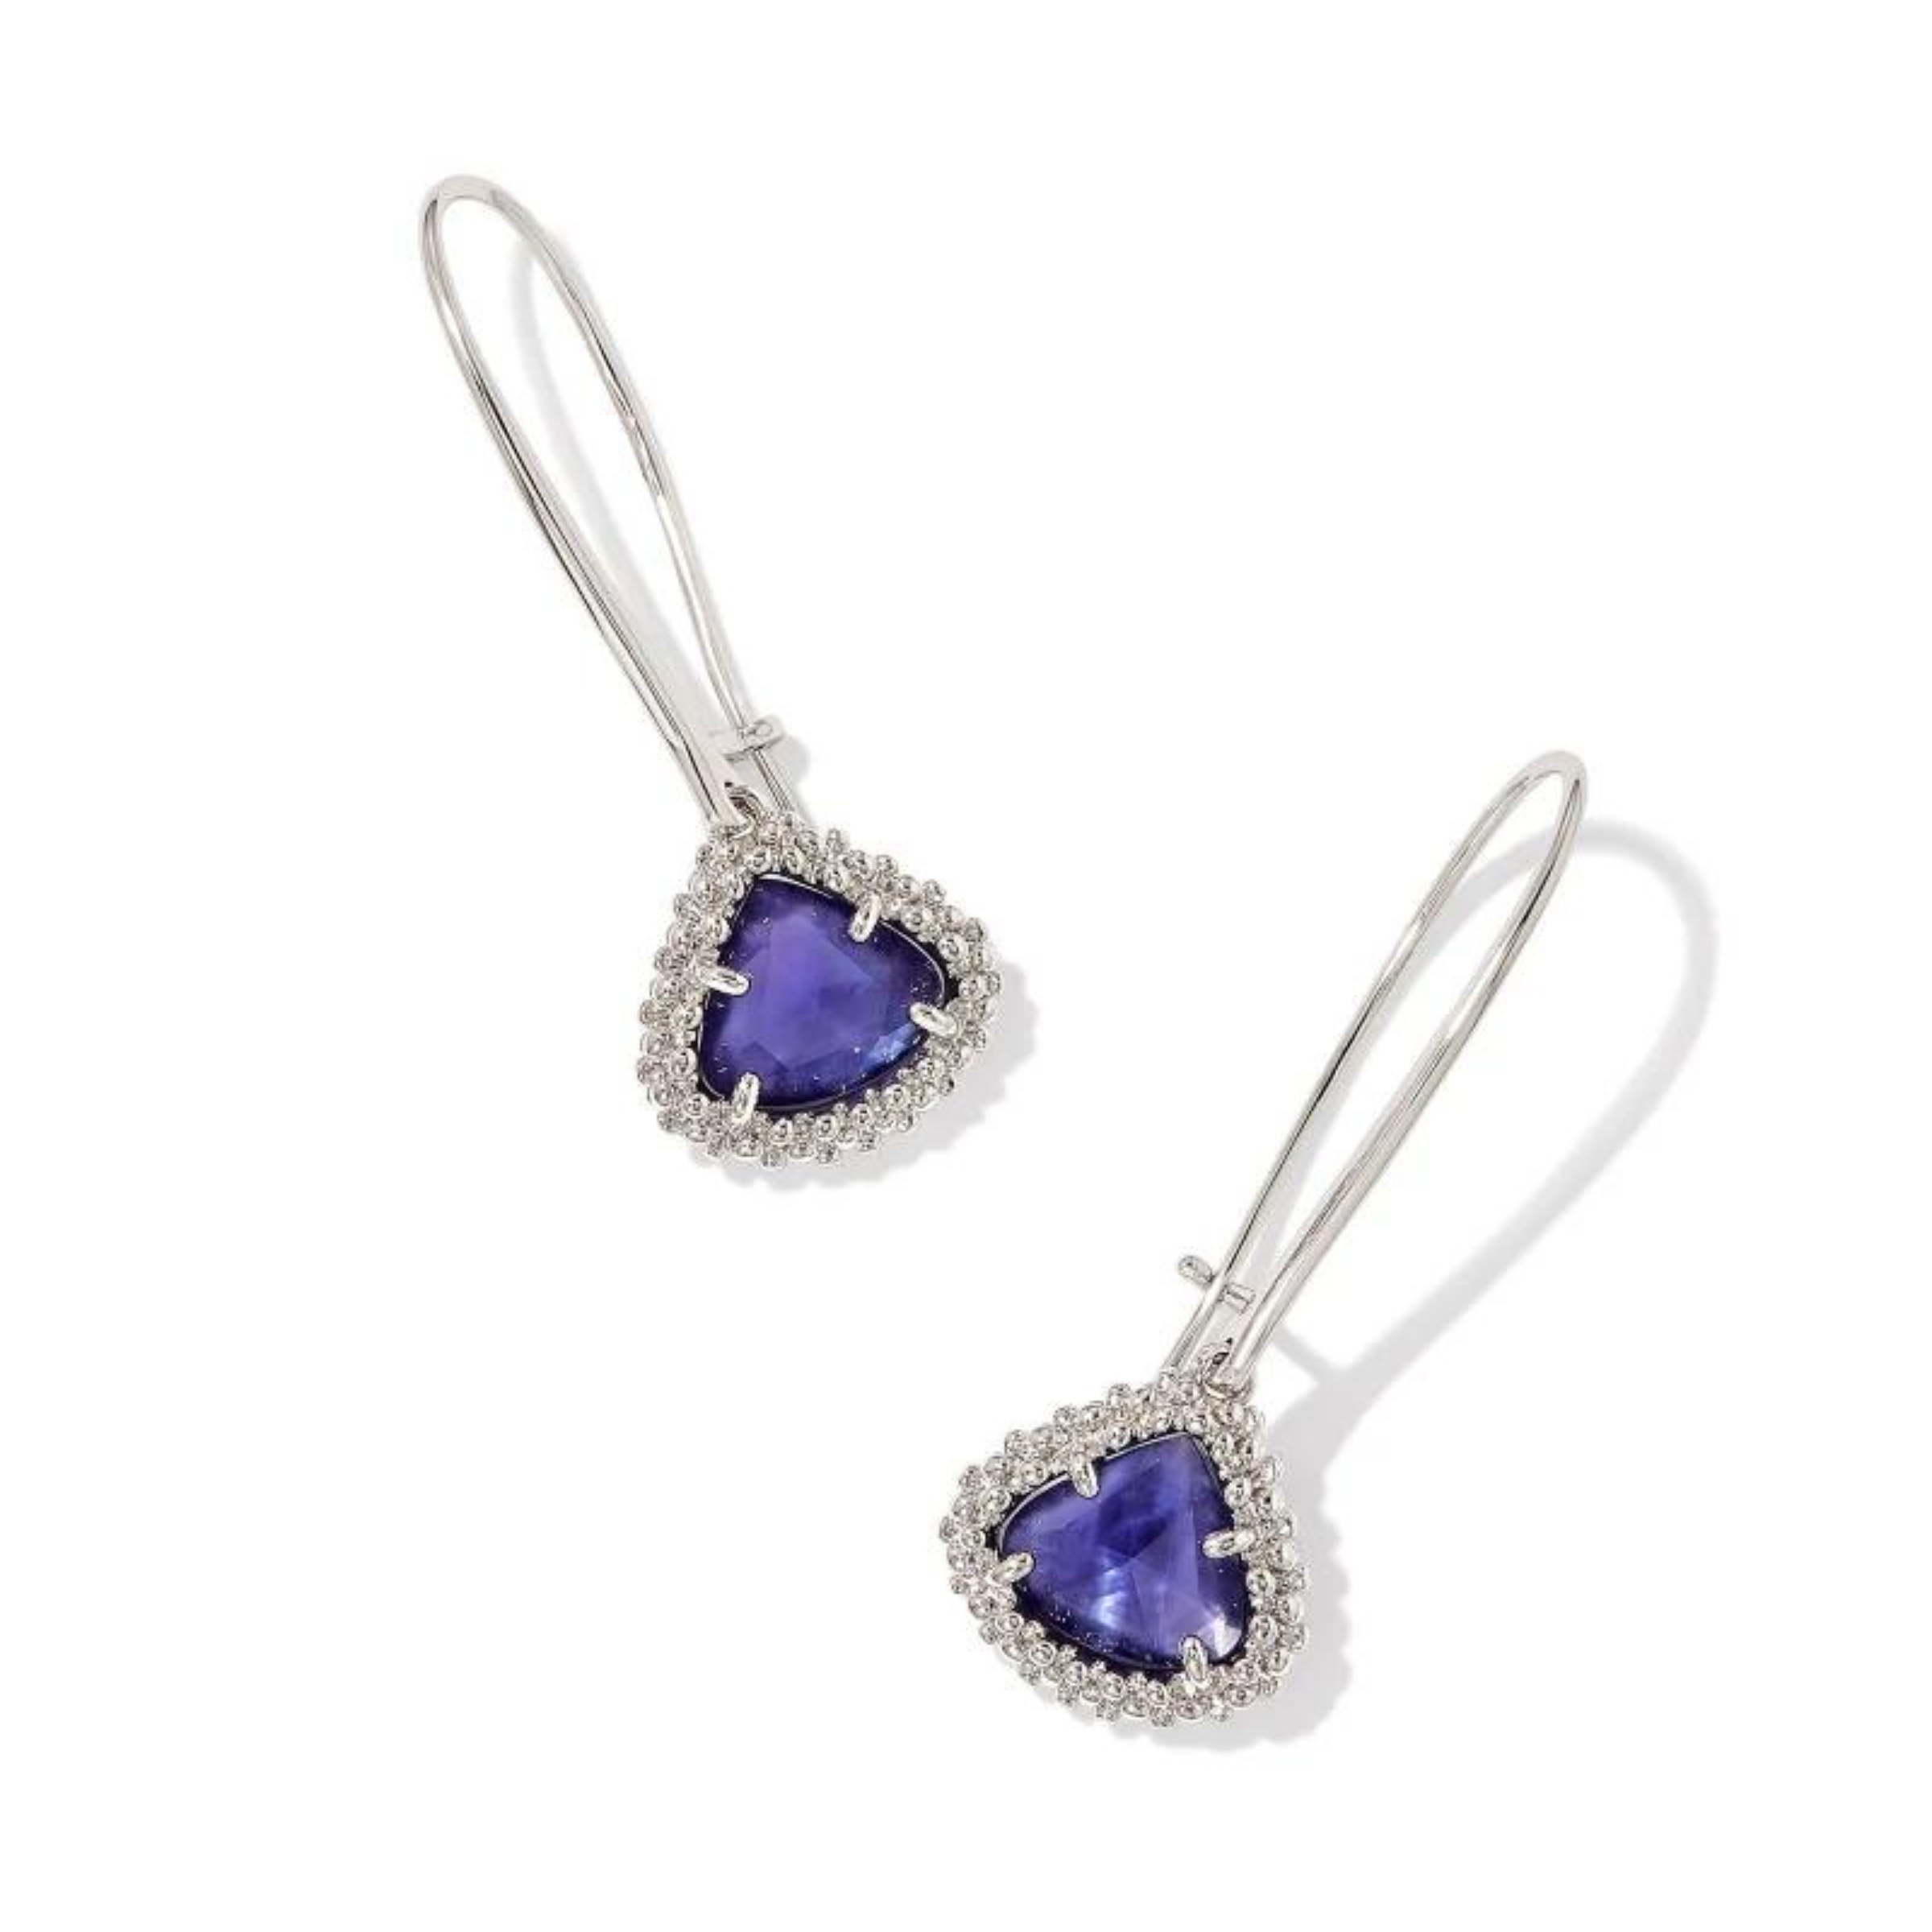 Silver, kidney wire drop earrings with a dark purple triangle crystal with a silver outline. These earrings are pictured on a white background. 